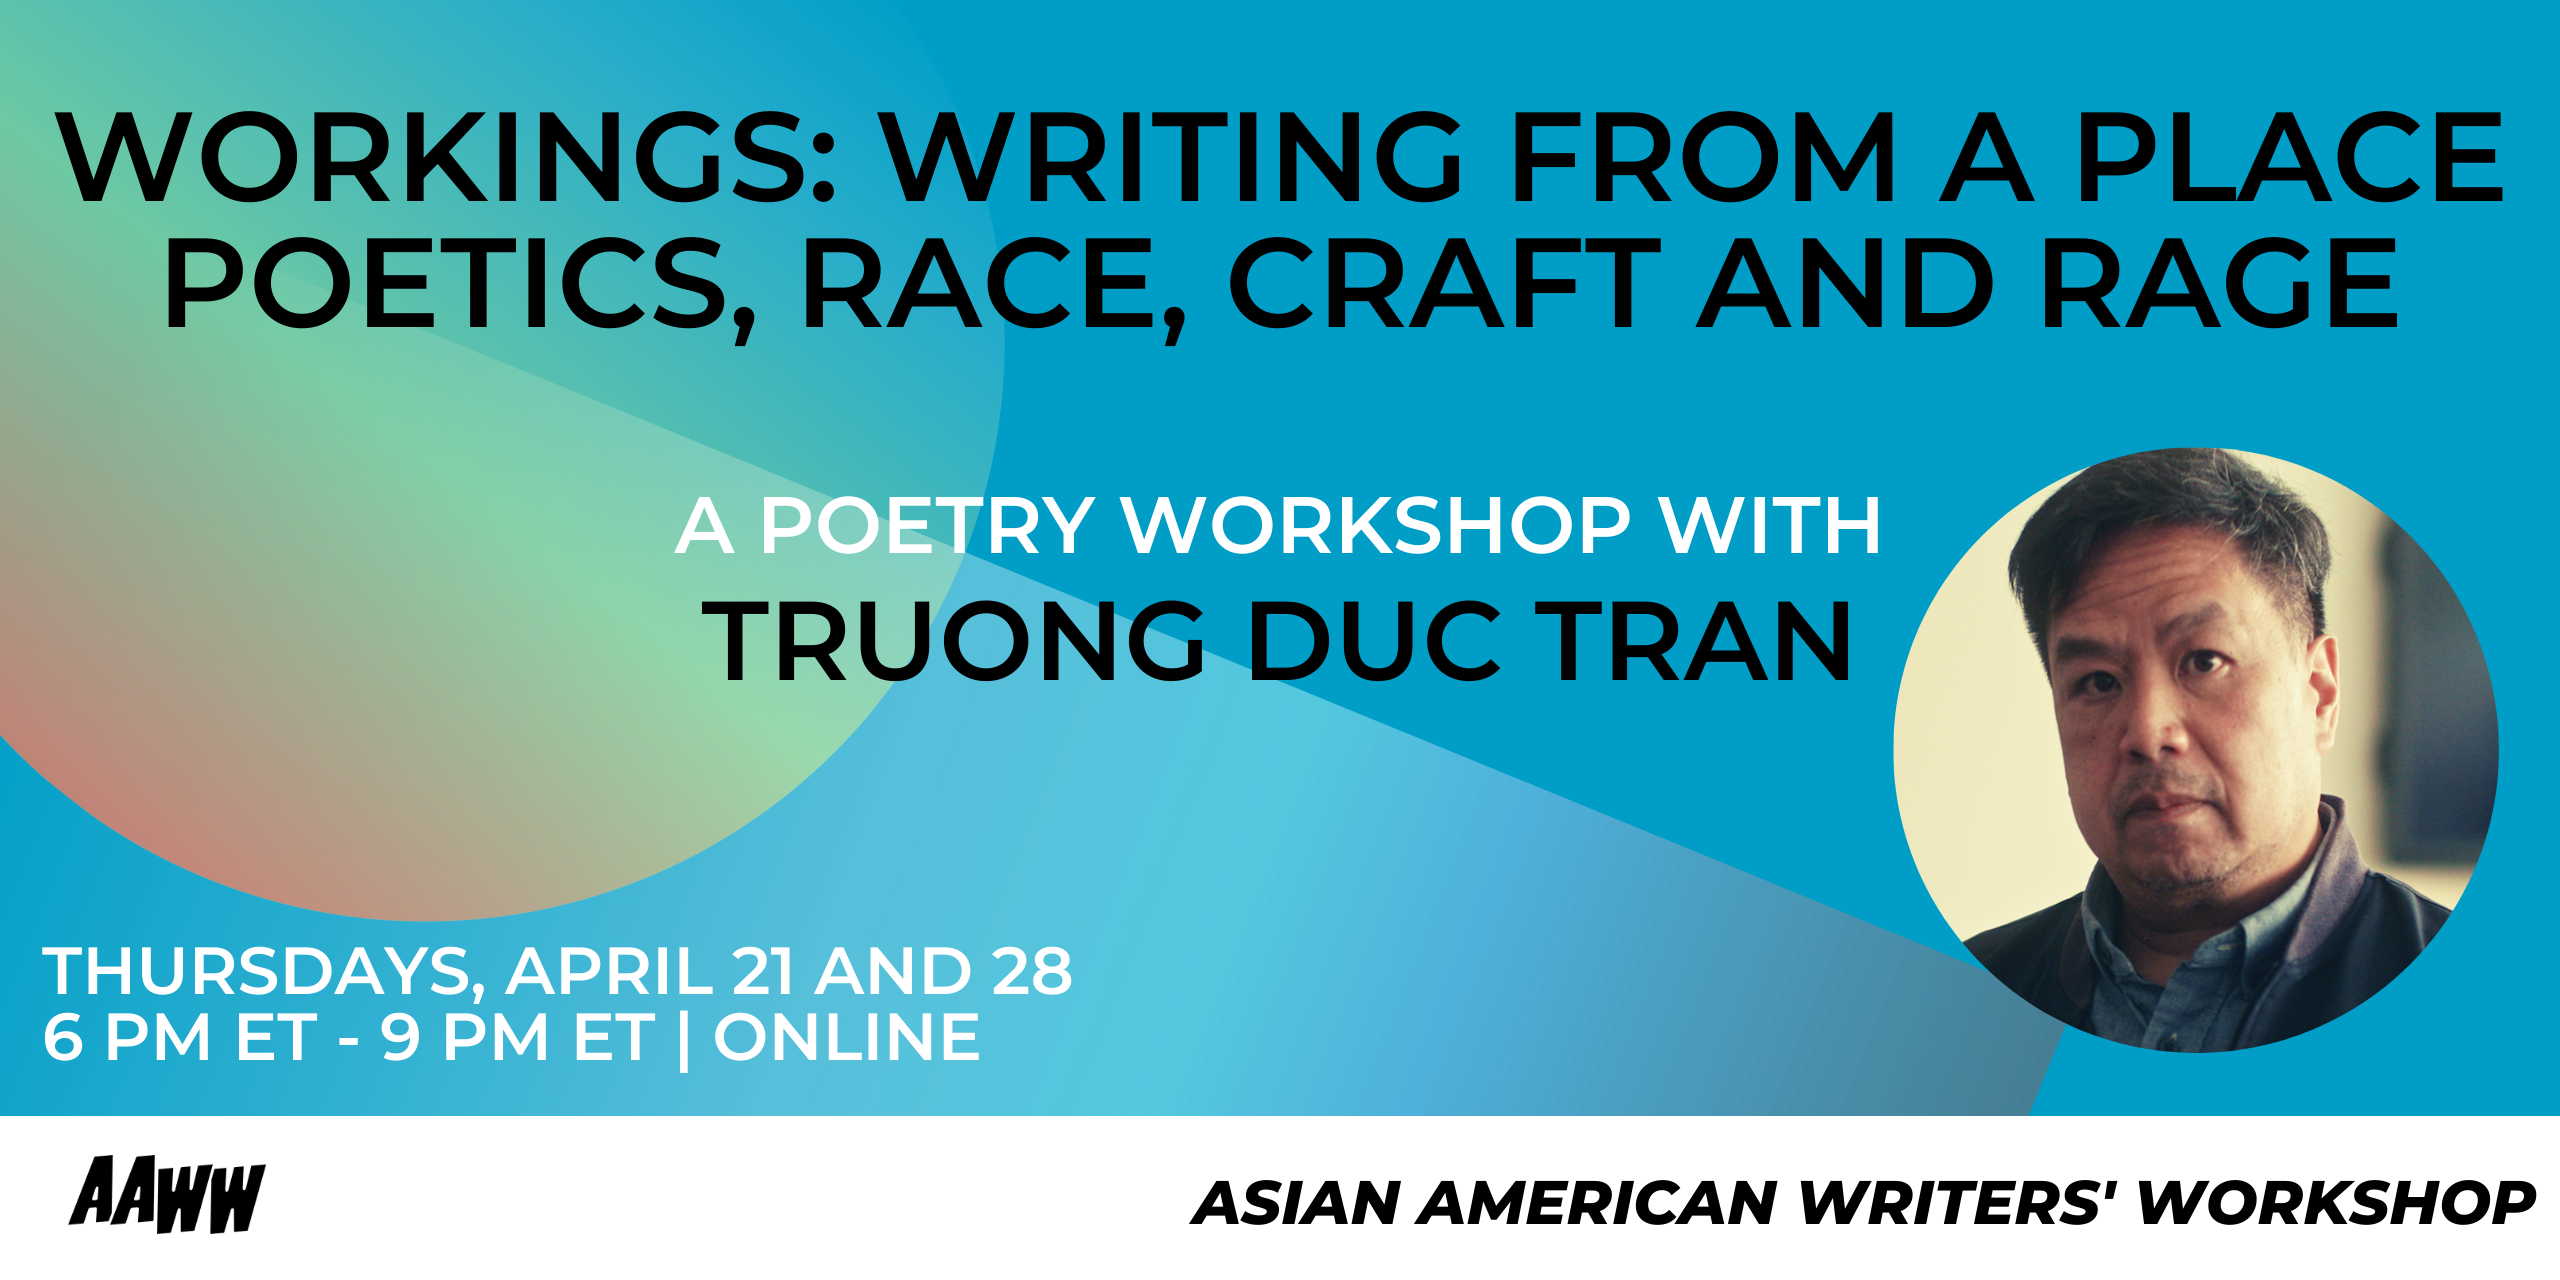 [VIRTUAL] WORKSHOP: Workings: Writing from a Place, Poetics, Race, Craft and Rage